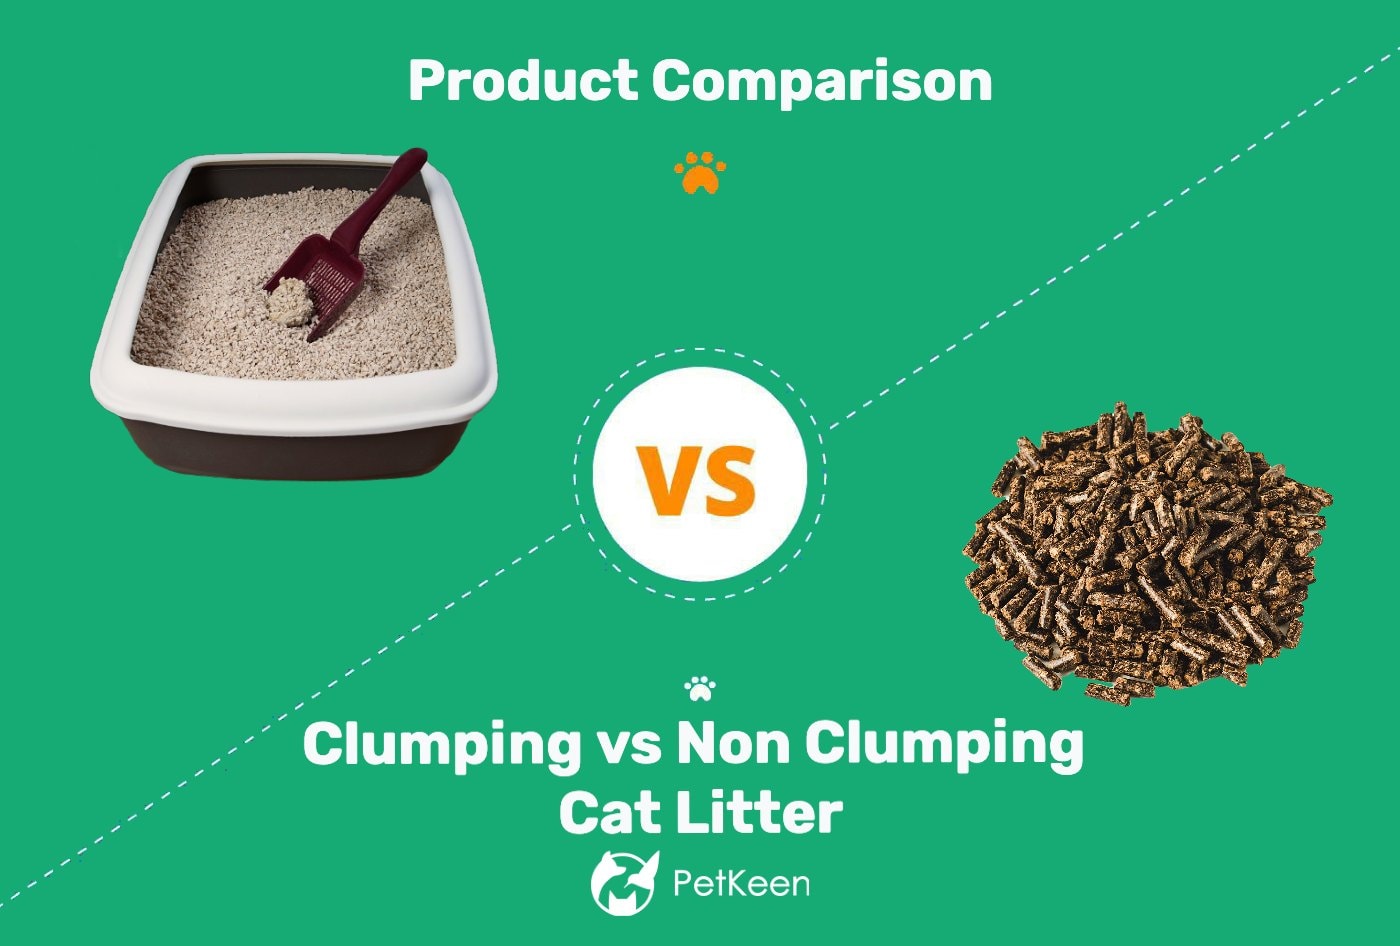 Can You Mix Clumping and Non Clumping Cat Litter?